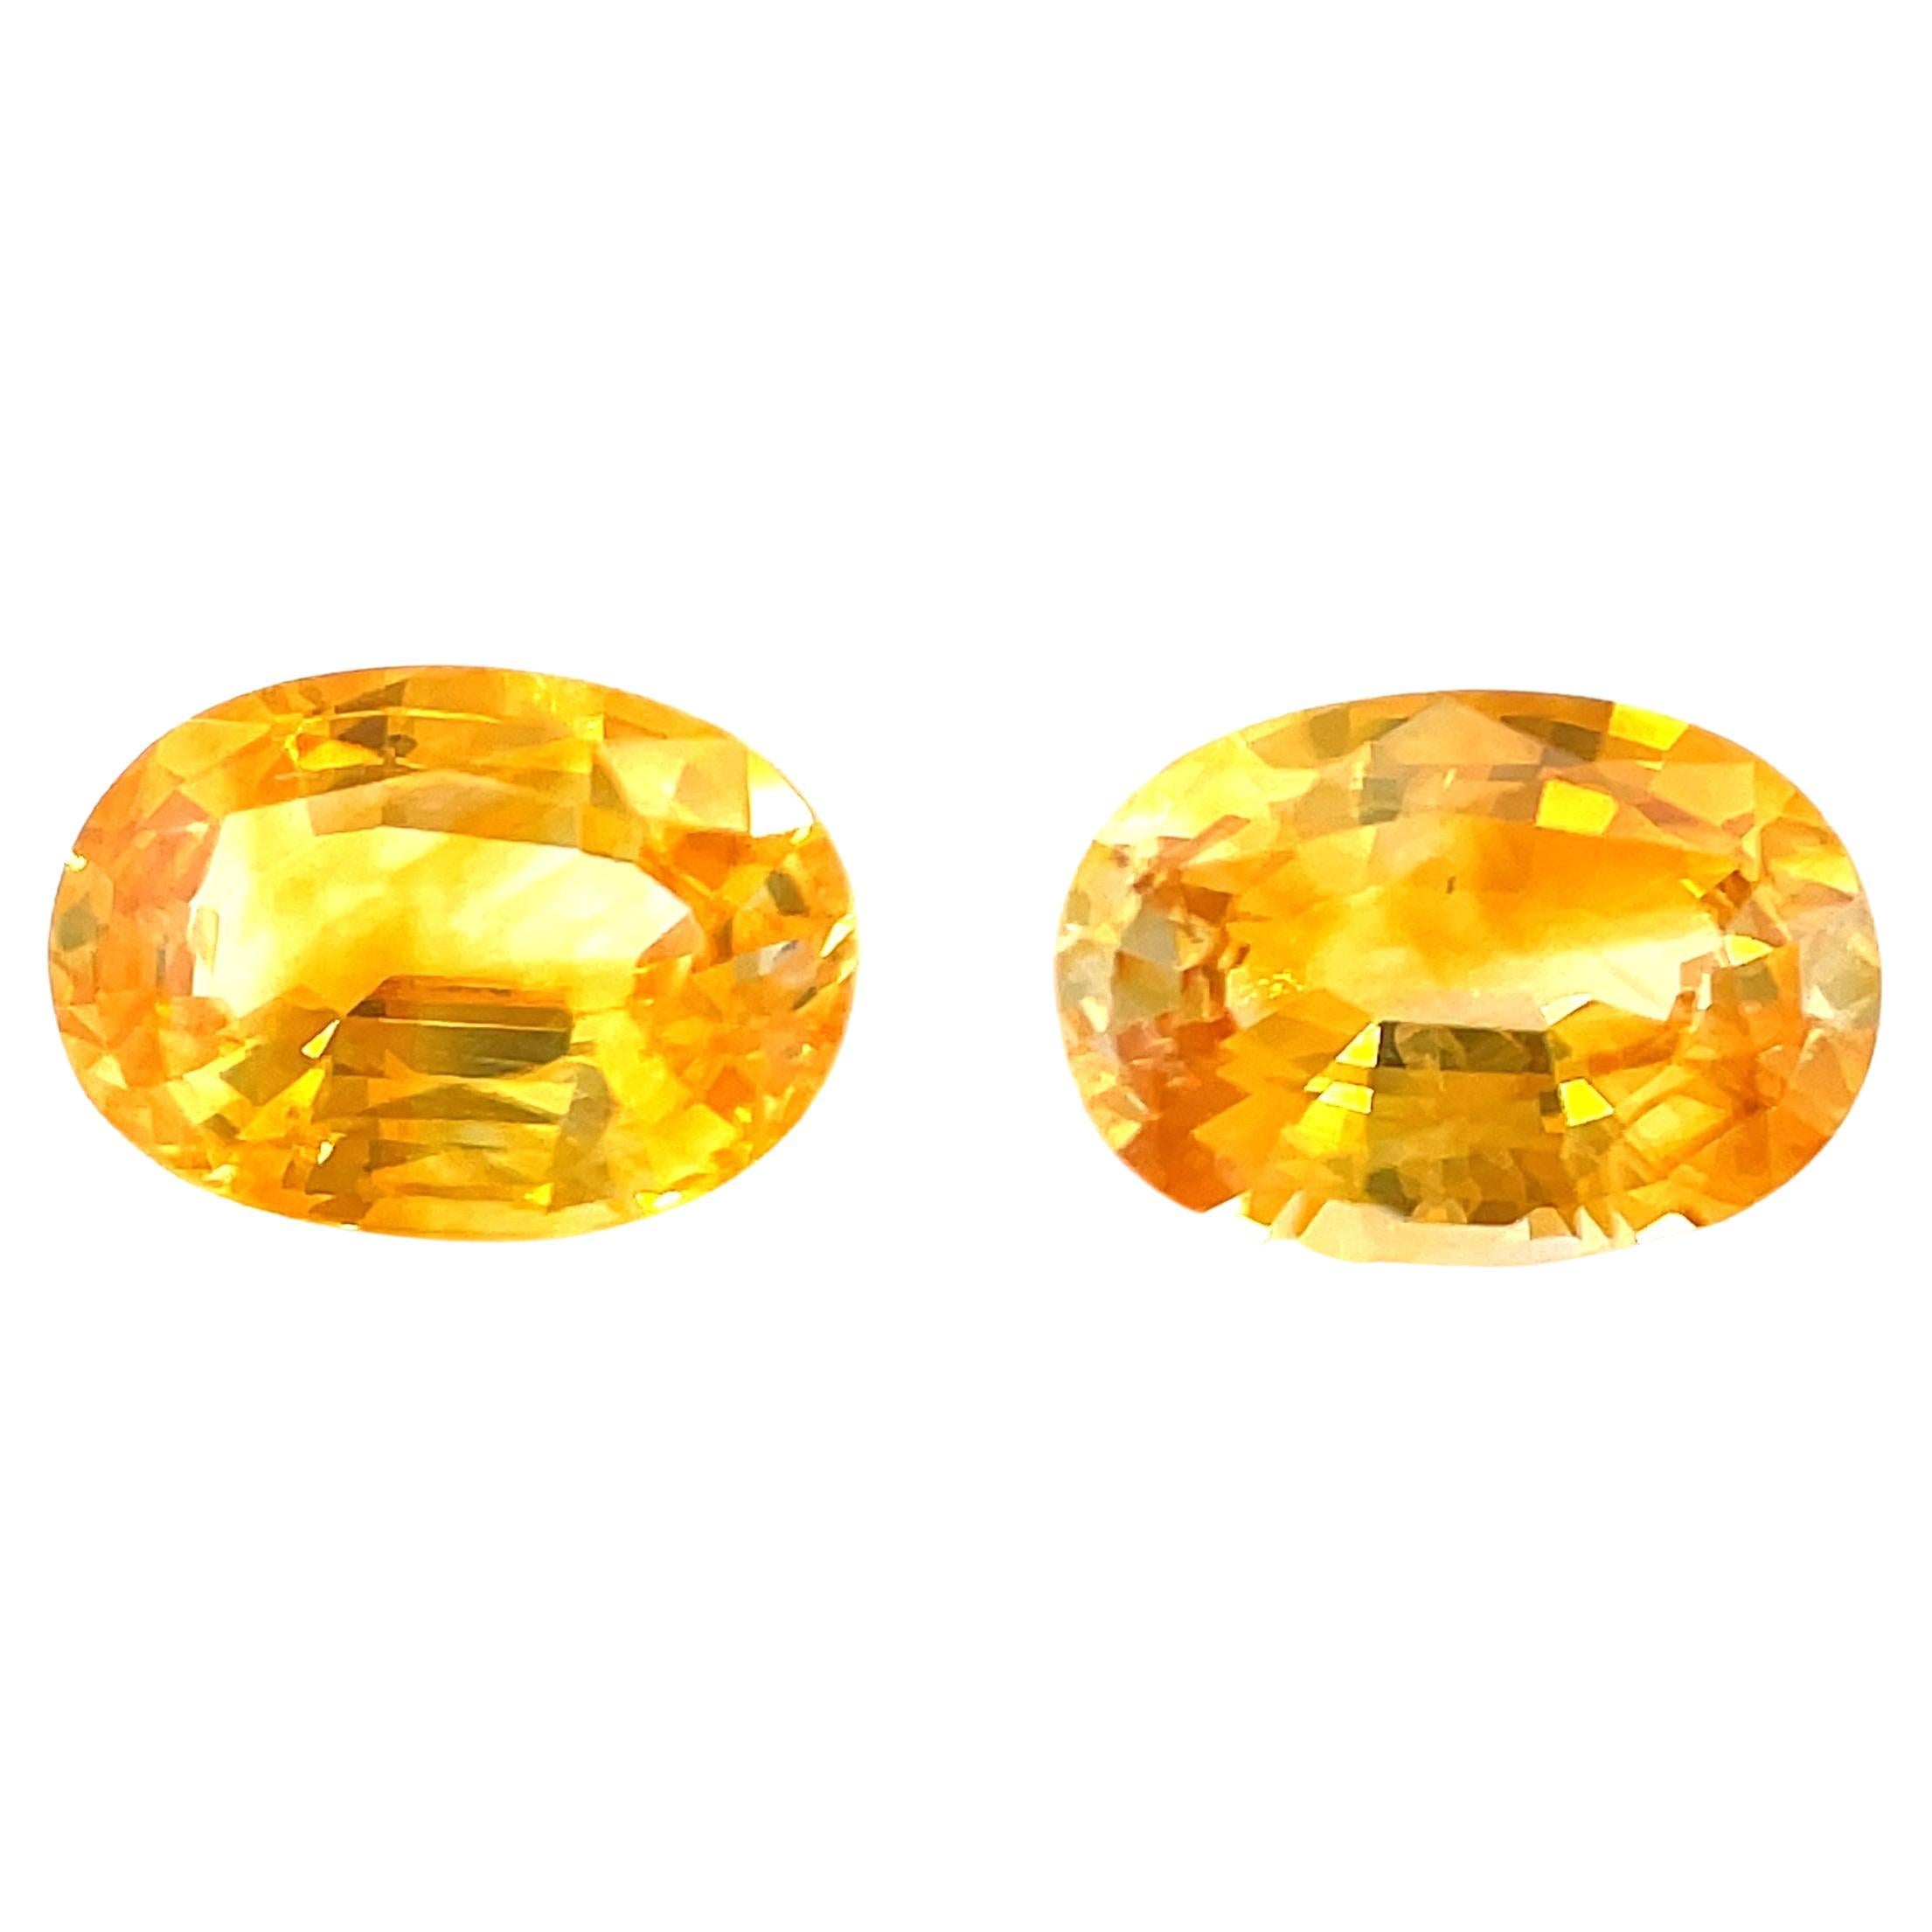 1.92 Carat Total Oval Yellow Sapphire Pair for Earrings, Loose Gemstones For Sale